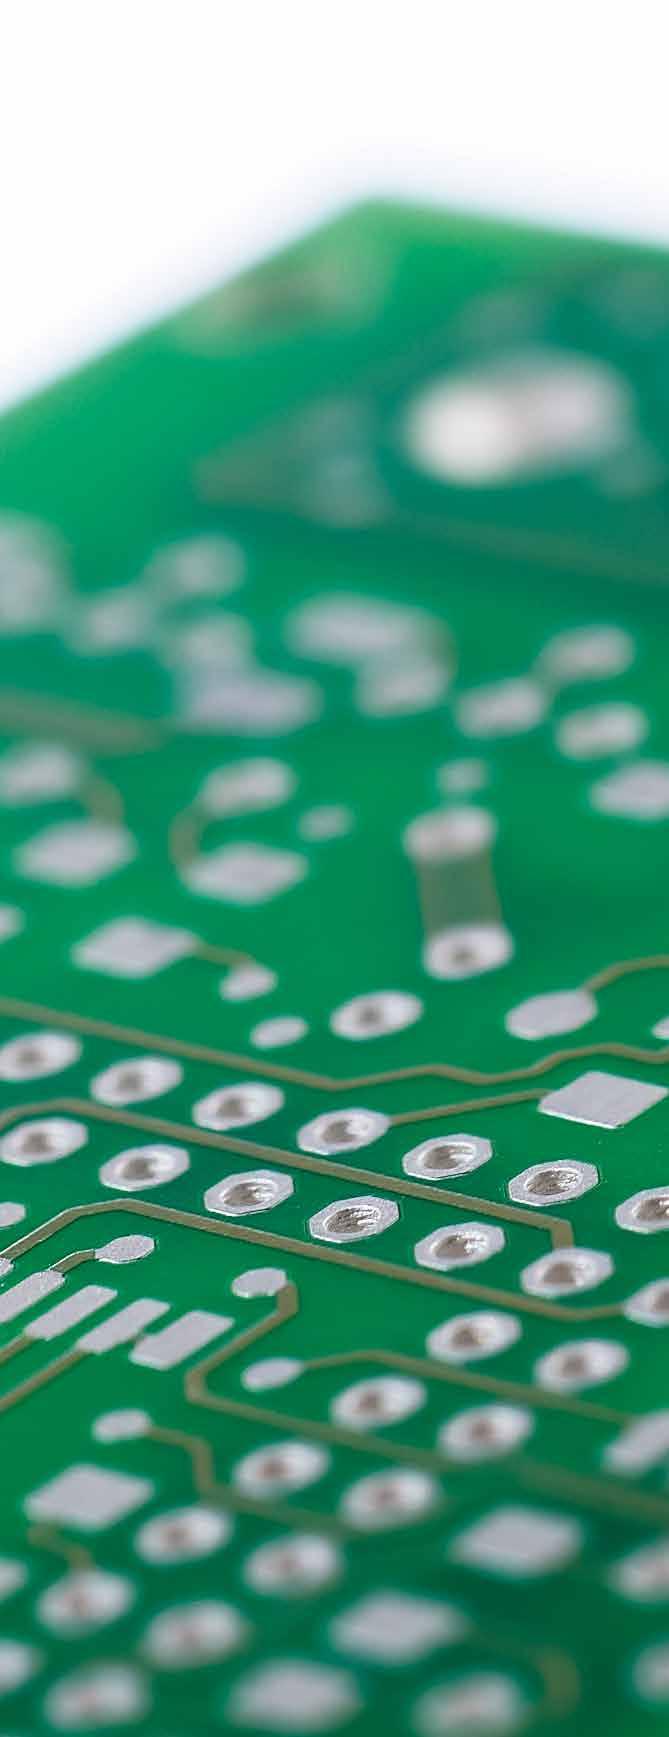 PCB TECHNOLOGY Equipment for the manufacture of printed circuit boards PCB technologies: One and double sided PCBs Through hole plated PCBs Multilayer up to max.